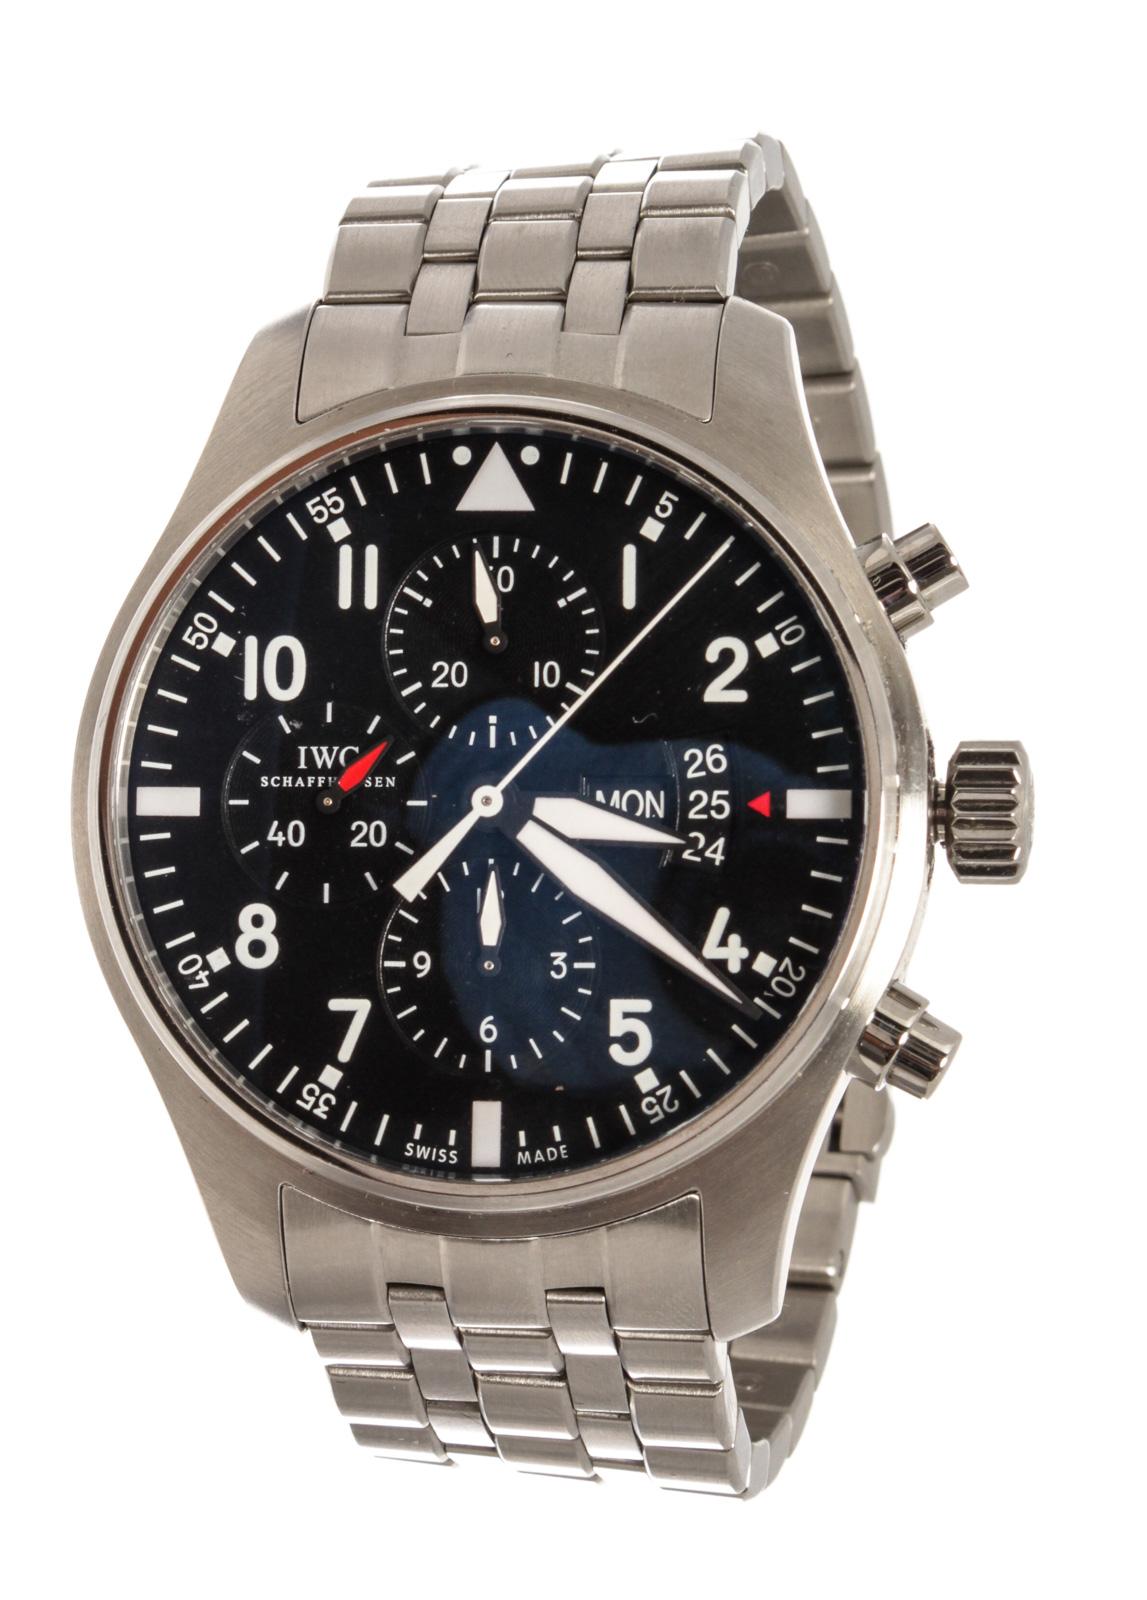 IWC Schaffhausen Pilot Fliegeruhr Chronograph Watch features stainless steel case with diameter 43mm and strap, sporty black dial, and sapphire glass, convex, antireflective coating on both sides.

Â 

52979MSC